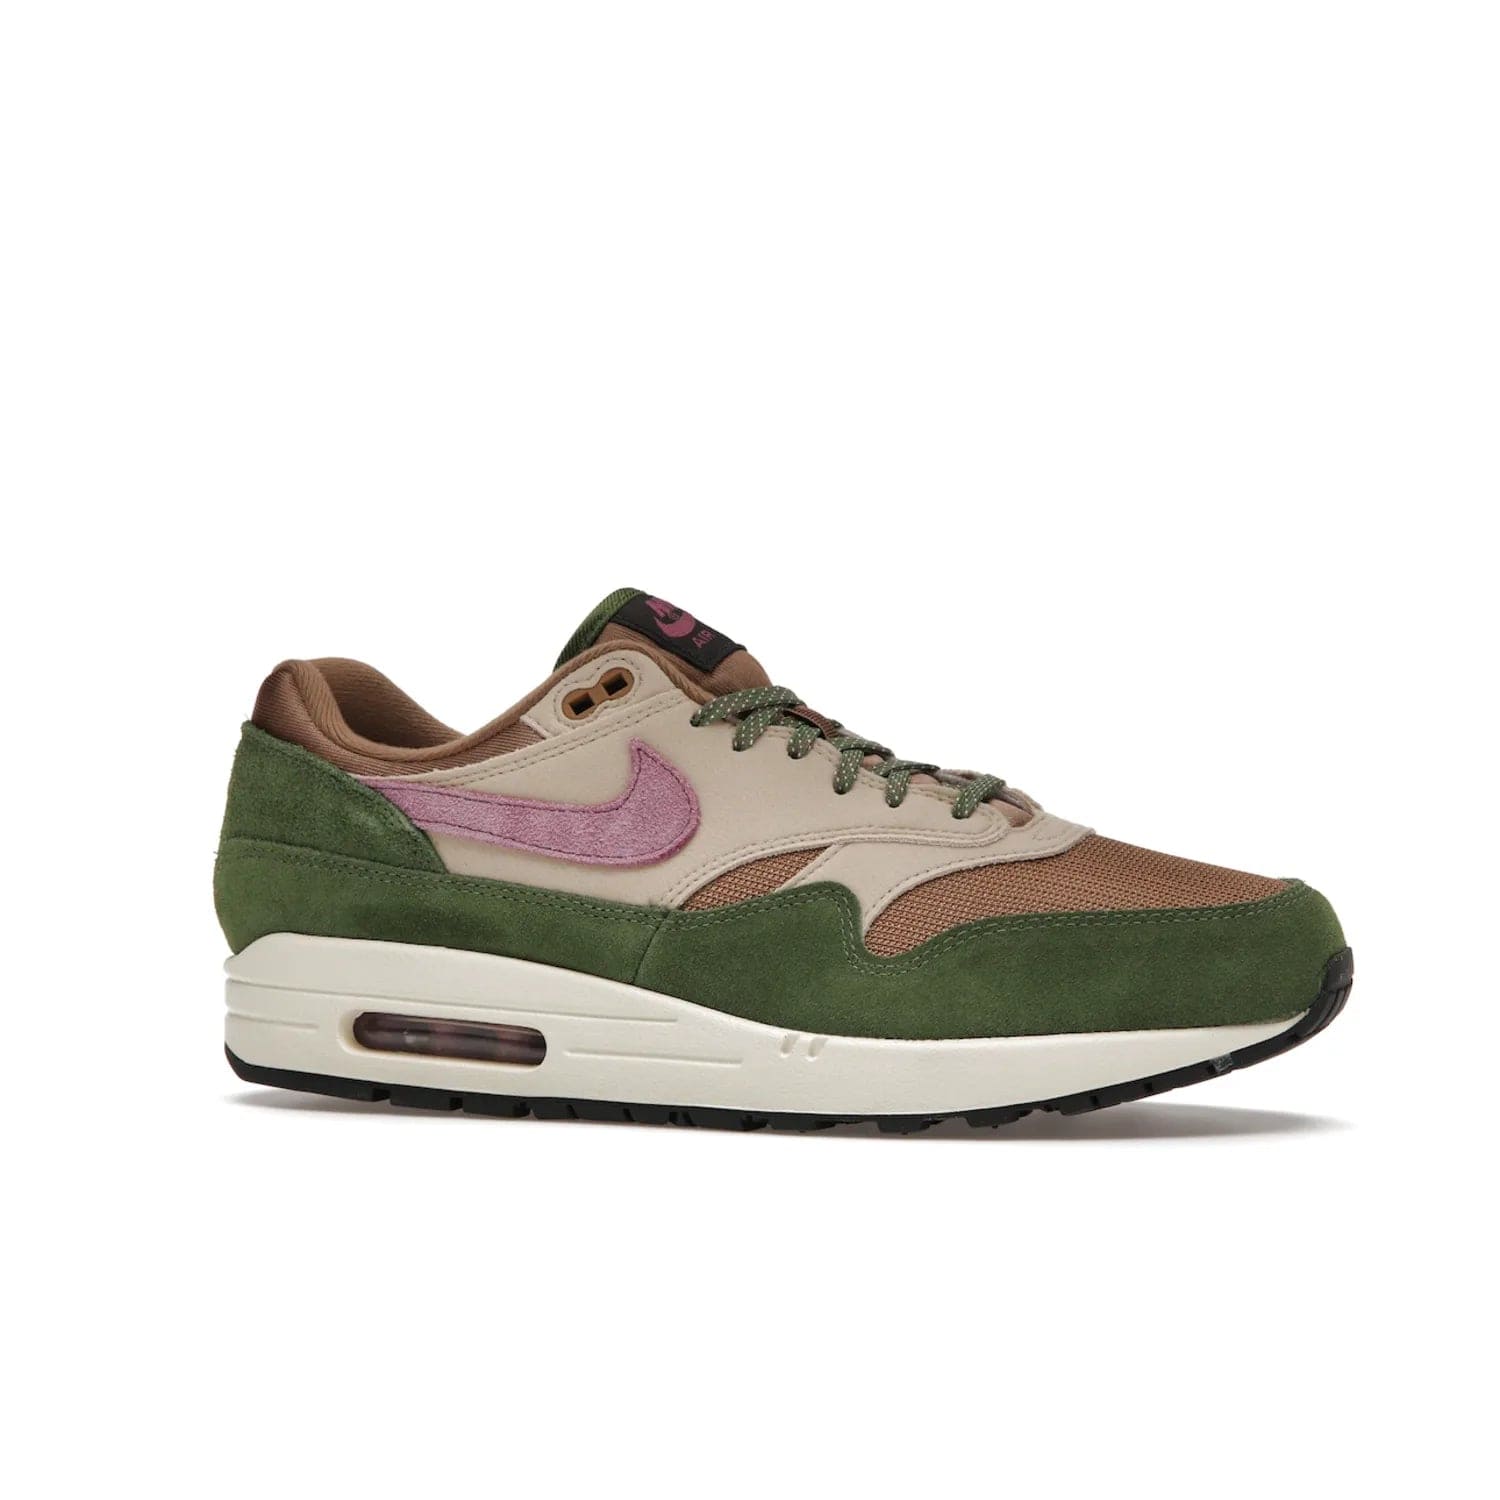 Nike Air Max 1 SH Treeline - Image 3 - Only at www.BallersClubKickz.com - A classic Nike Air Max 1 SH Treeline with a brown mesh upper, taupe Durabuck overlays, and hairy green suede details. Light Bordeaux Swoosh and woven tongue label for a pop of color. Released in May 2022. Perfect for any outfit and sure to impress.